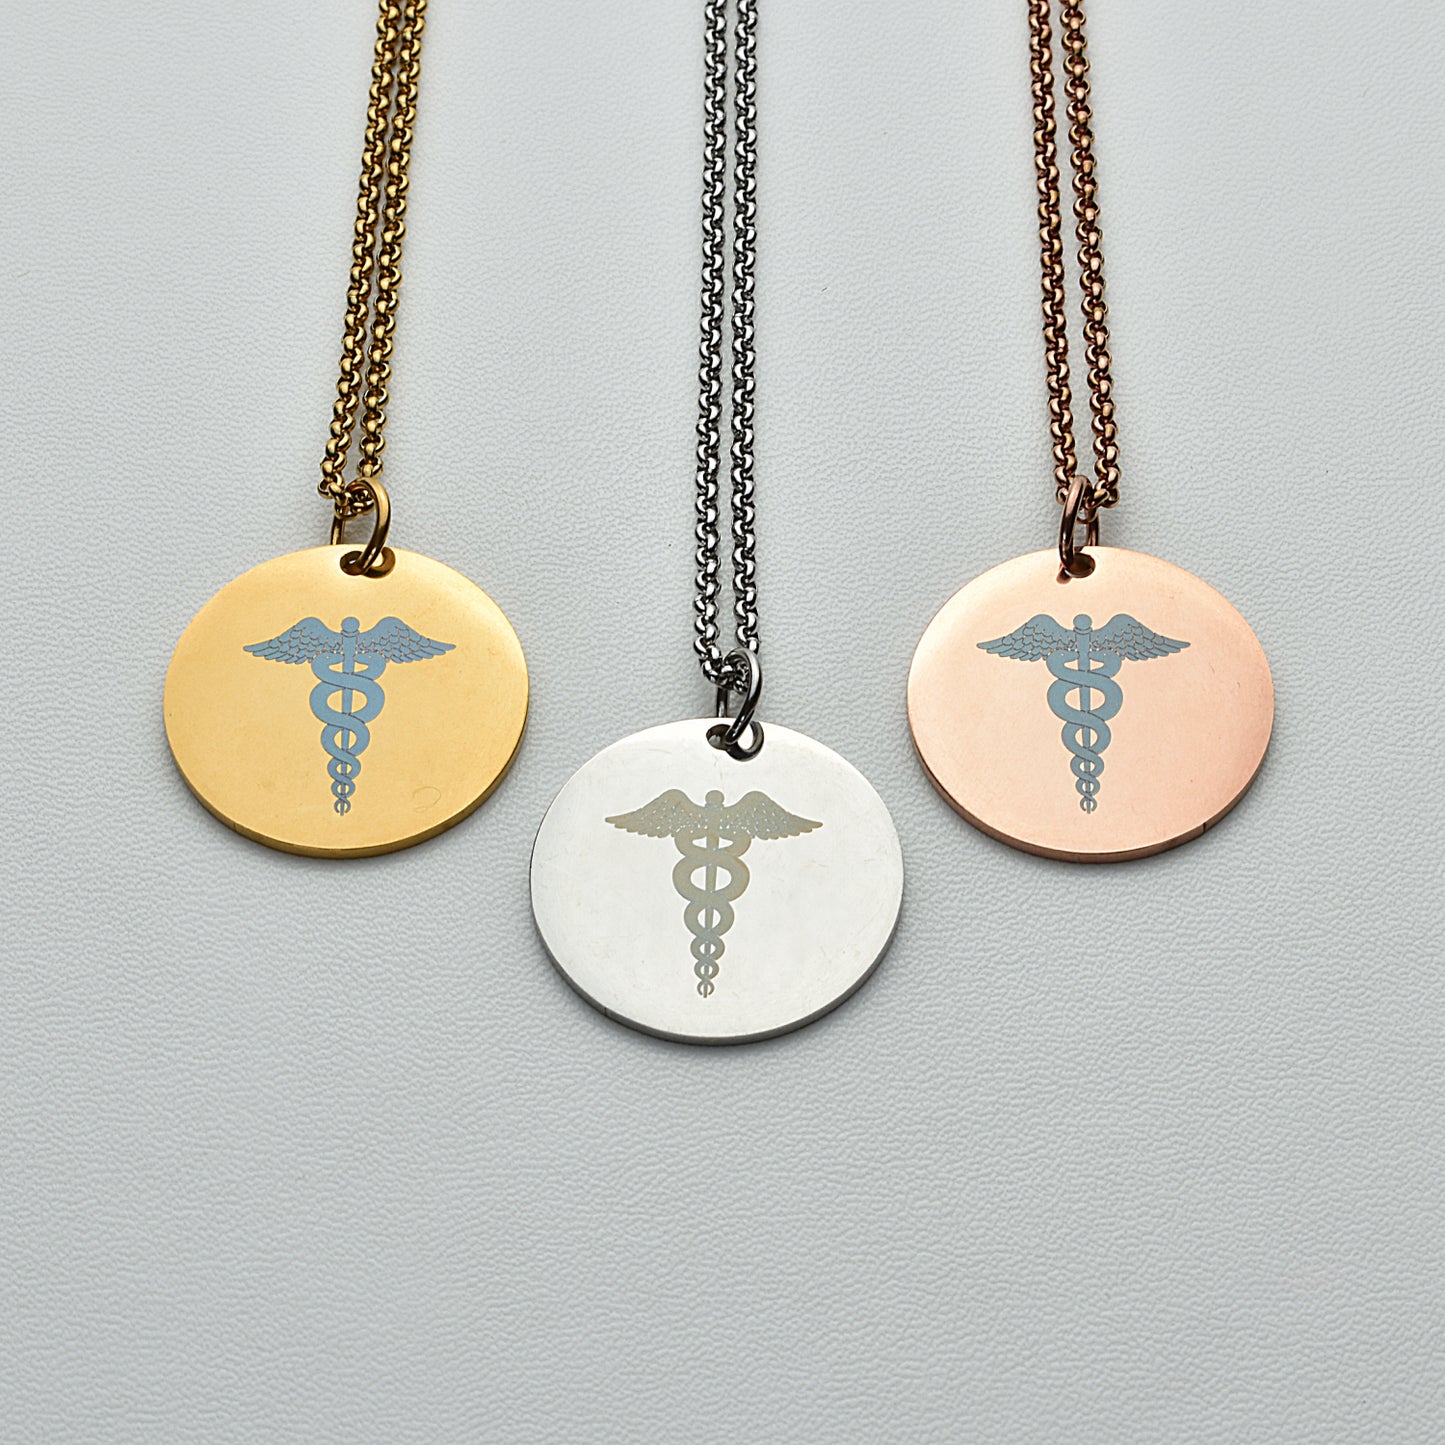 Personalised Medical ID Alert Caduceus Stainless Steel Necklace